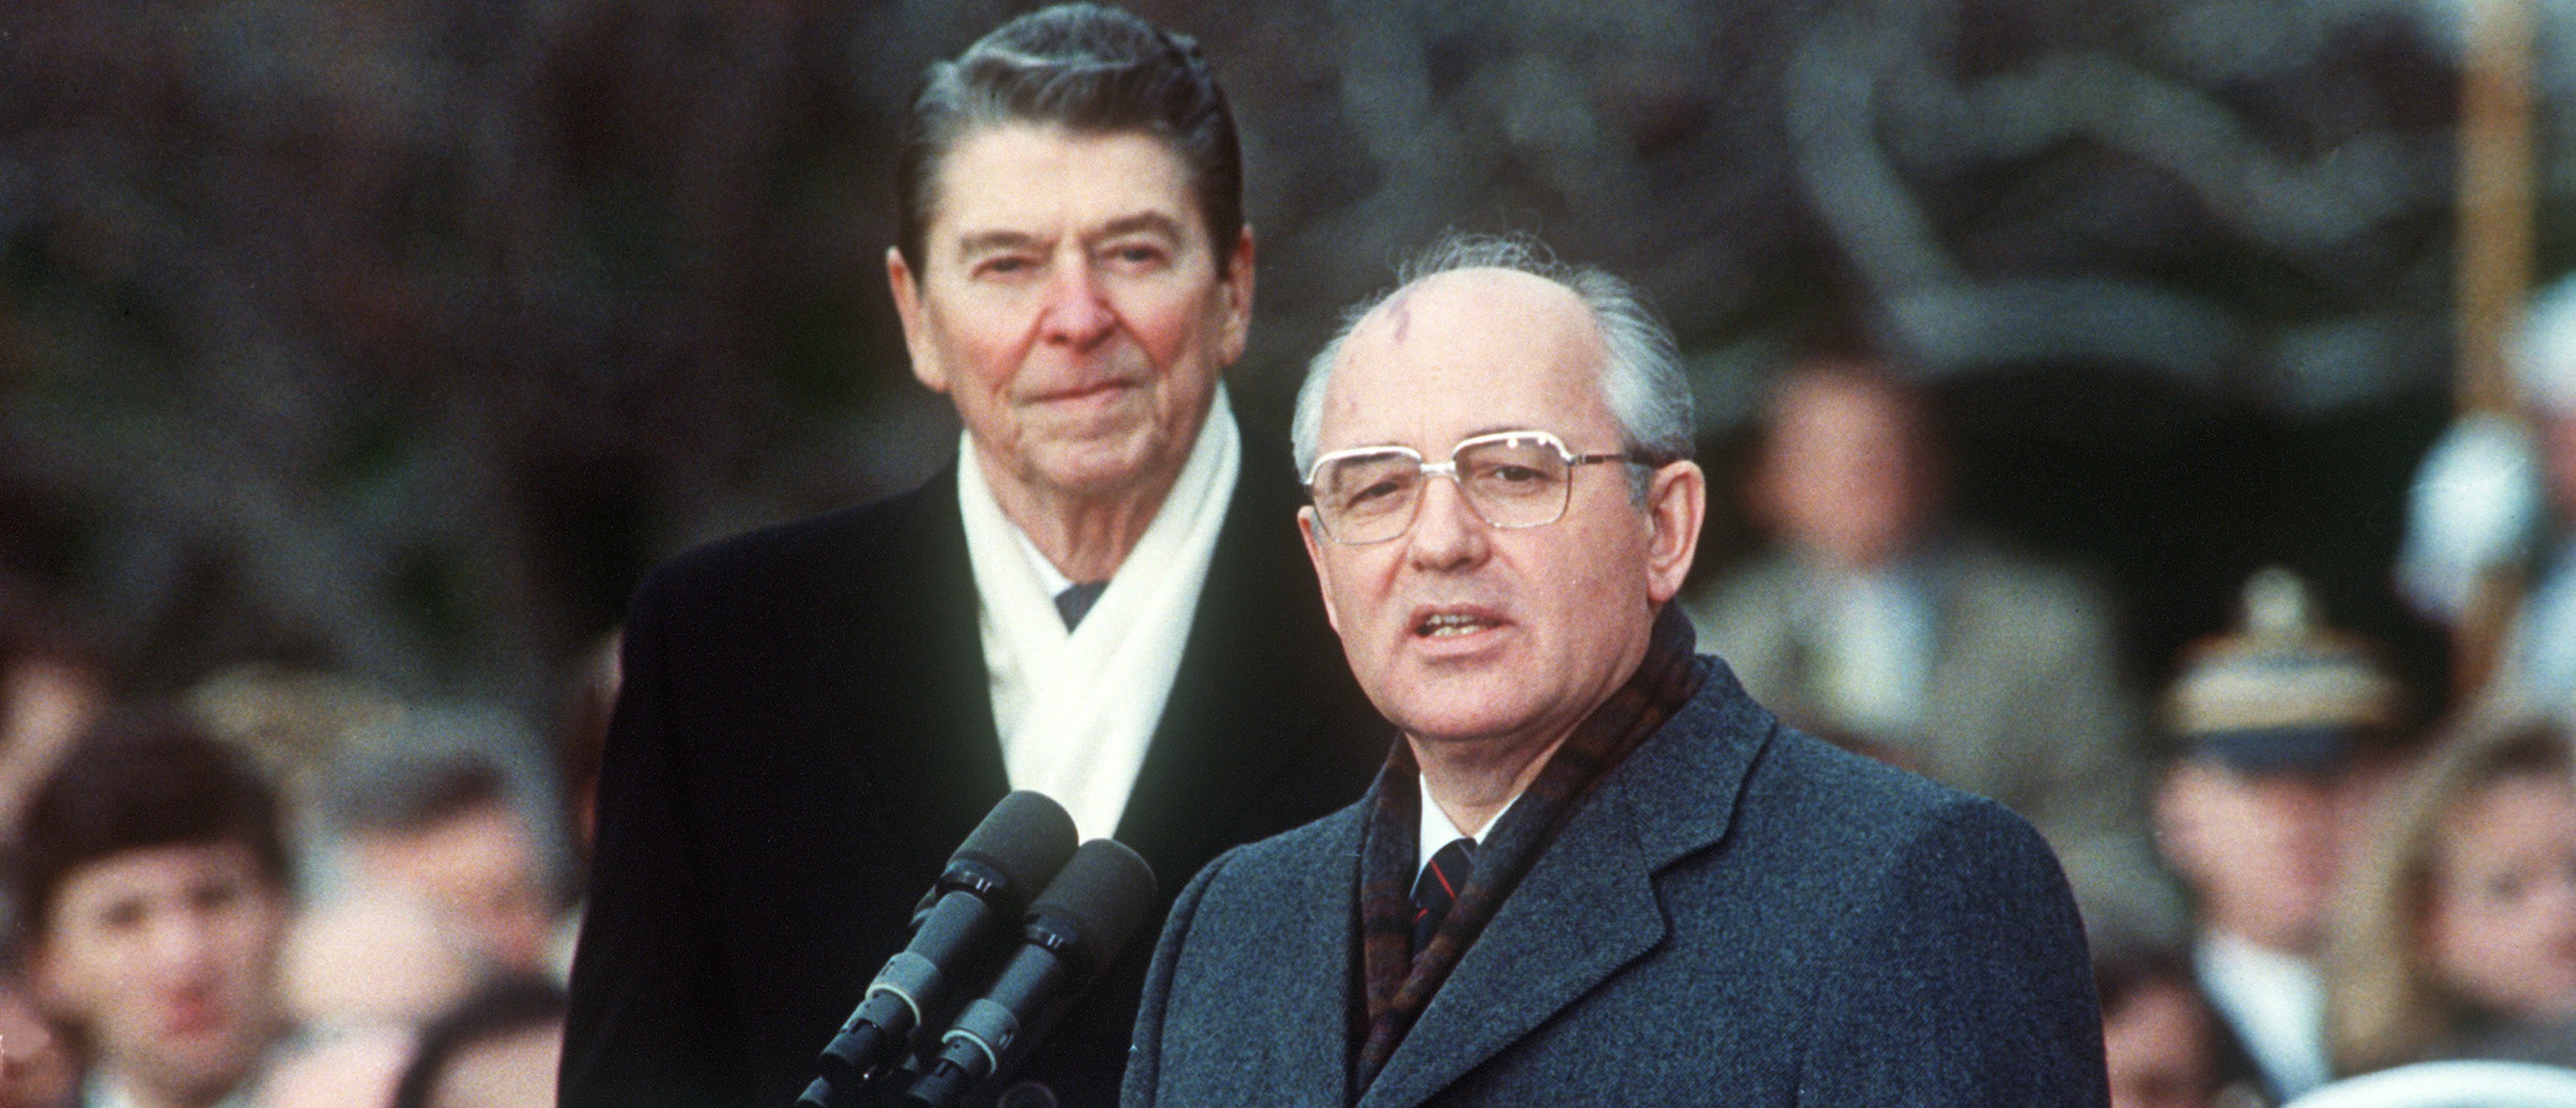 This December 1987 photo shows U.S. President Ronald Reagan (L) with Soviet leader Mikhail Gorbachev during welcoming ceremonies at the White House on the first day of their disarmament summit. (Photo: AFP PHOTO / JEROME DELAY/Getty Images)